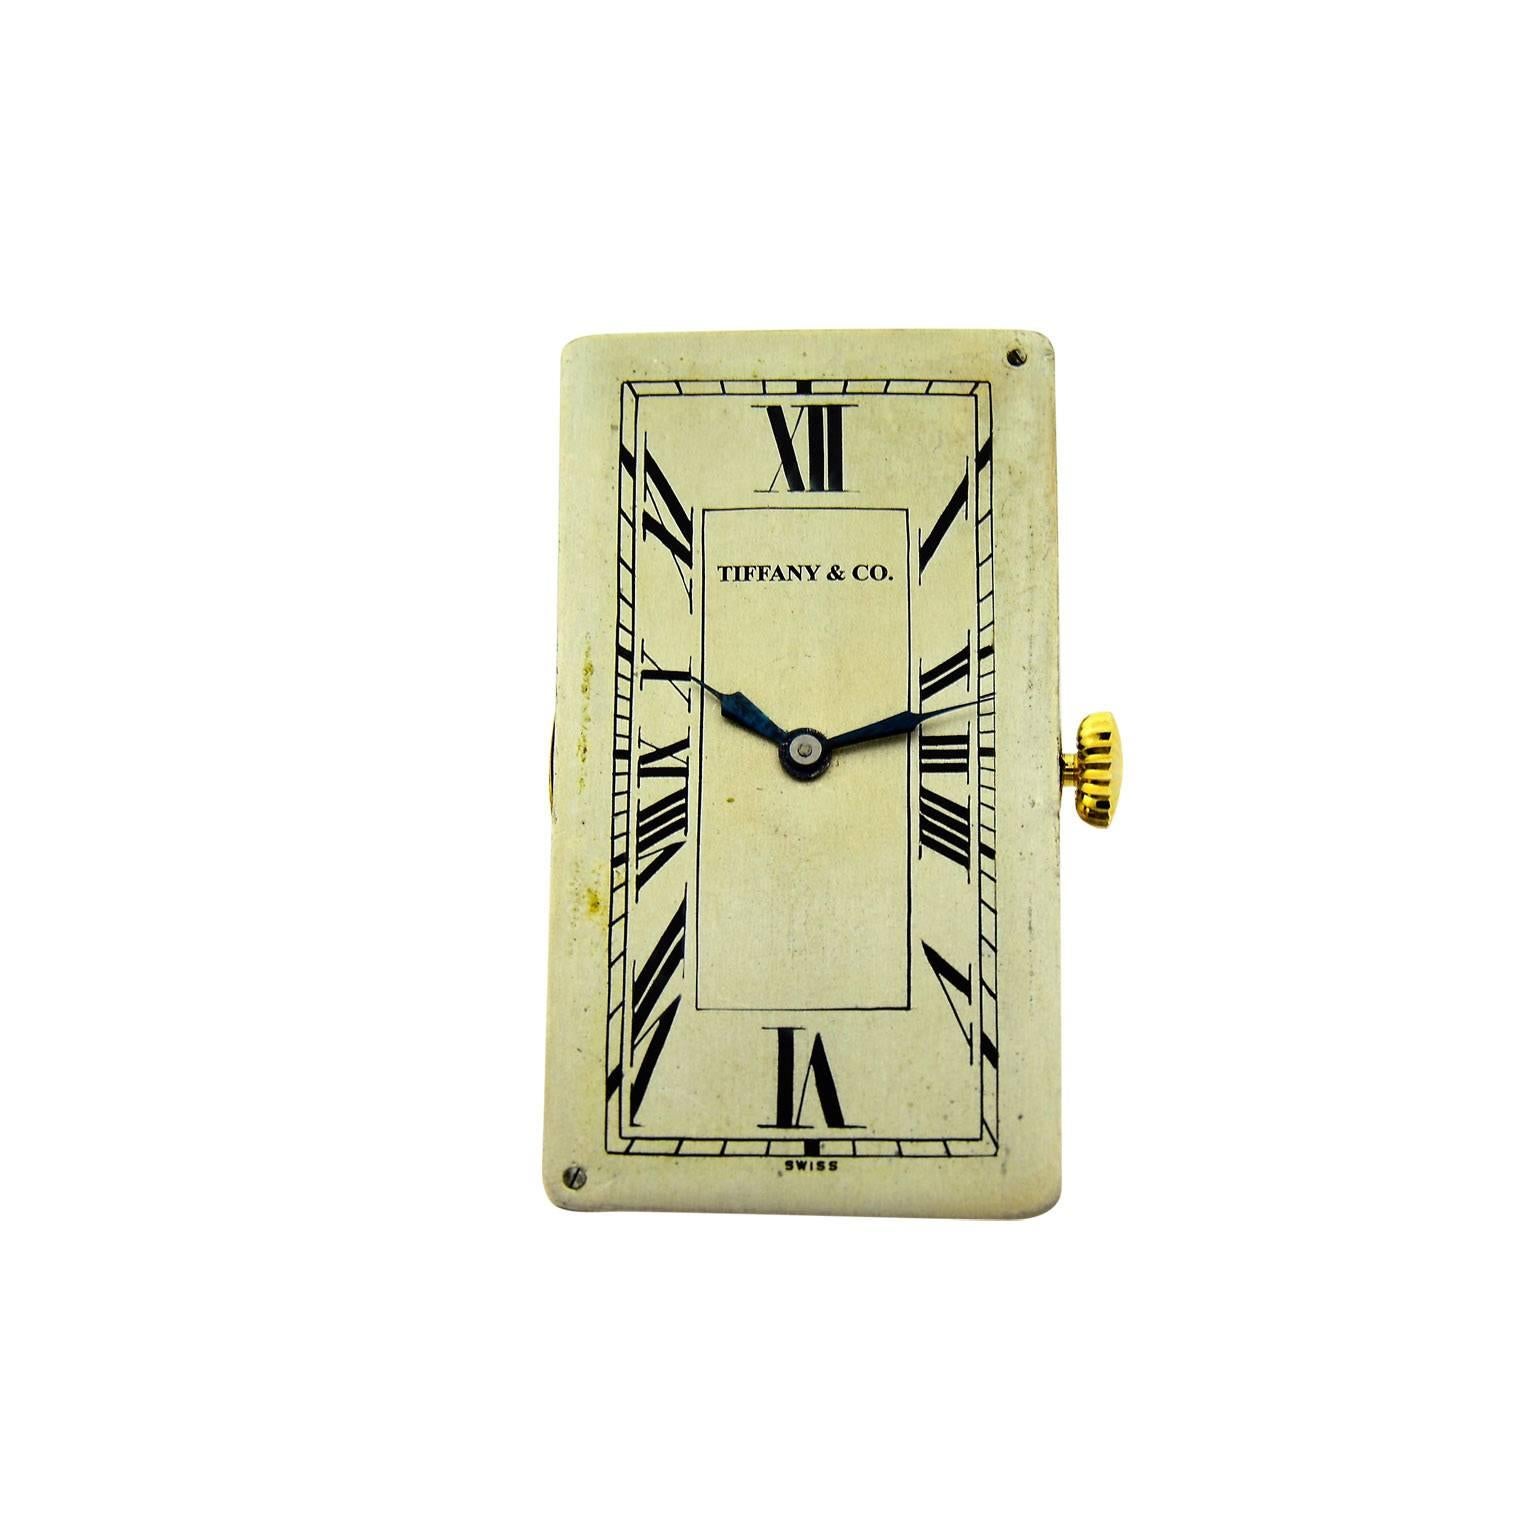 Tiffany & Co. Yellow Gold Super Sized Rectangle Art Deco Manual Watch 3